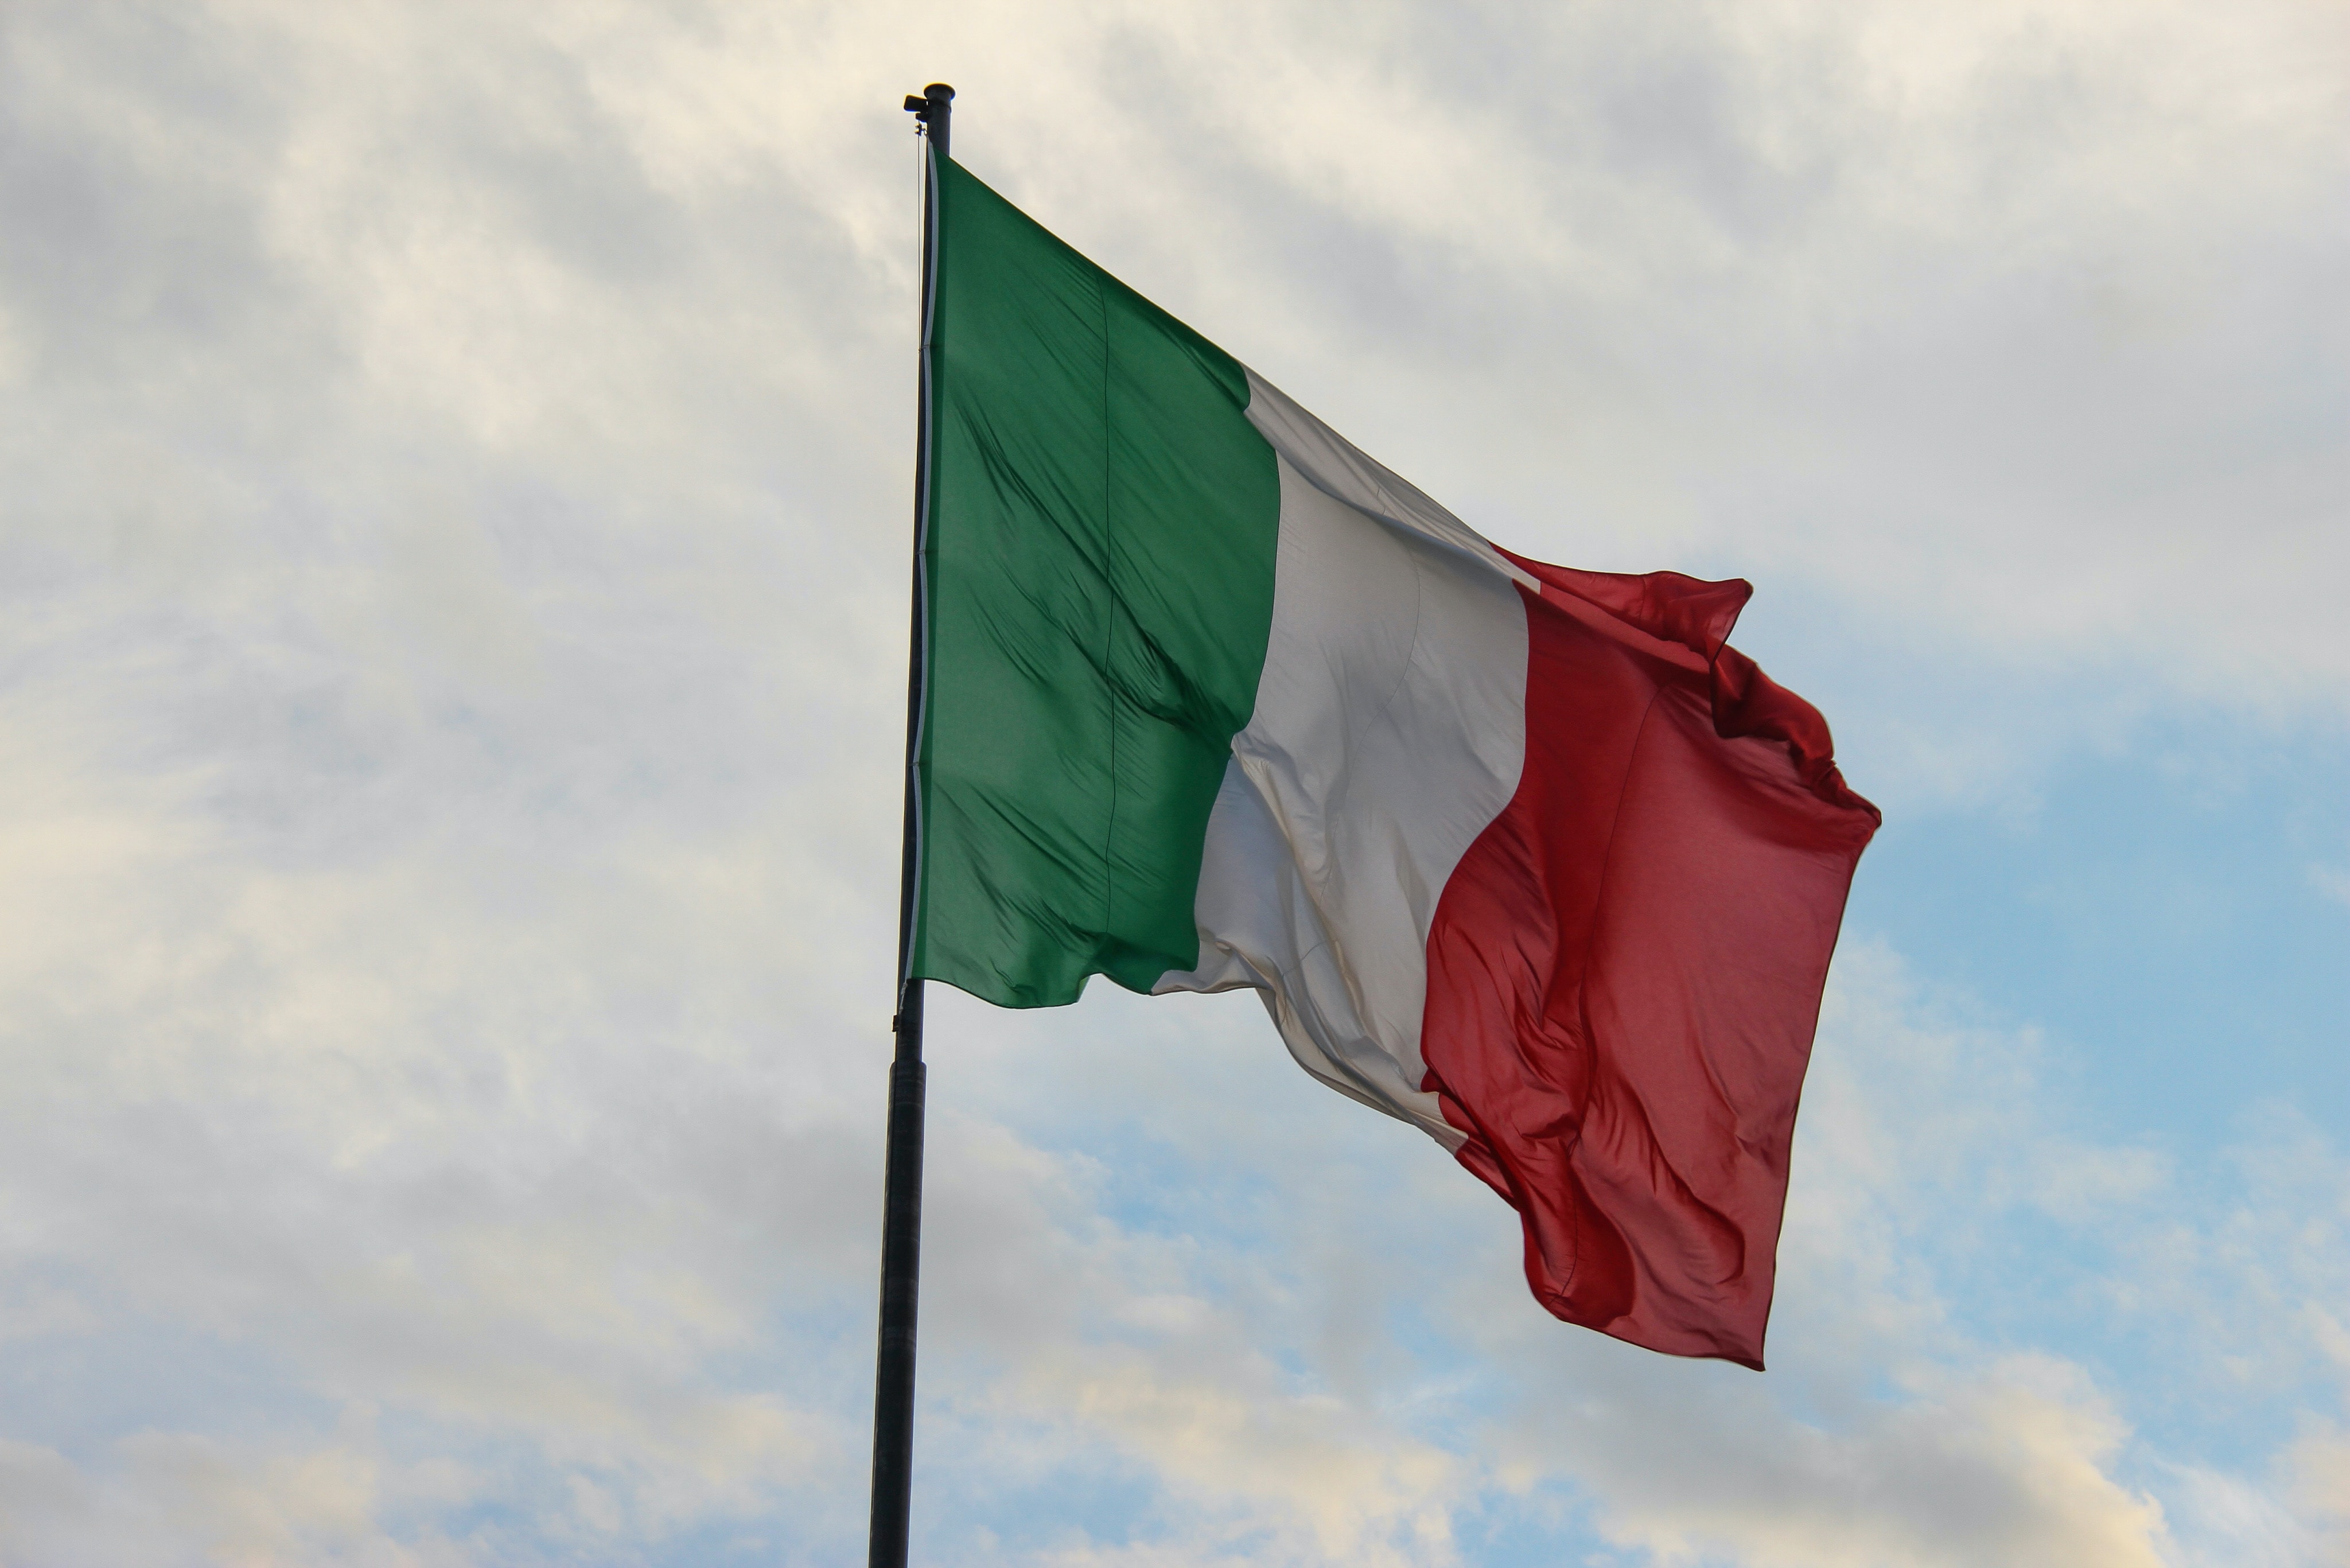 Italian red white and green flag against blue sky and clouds background